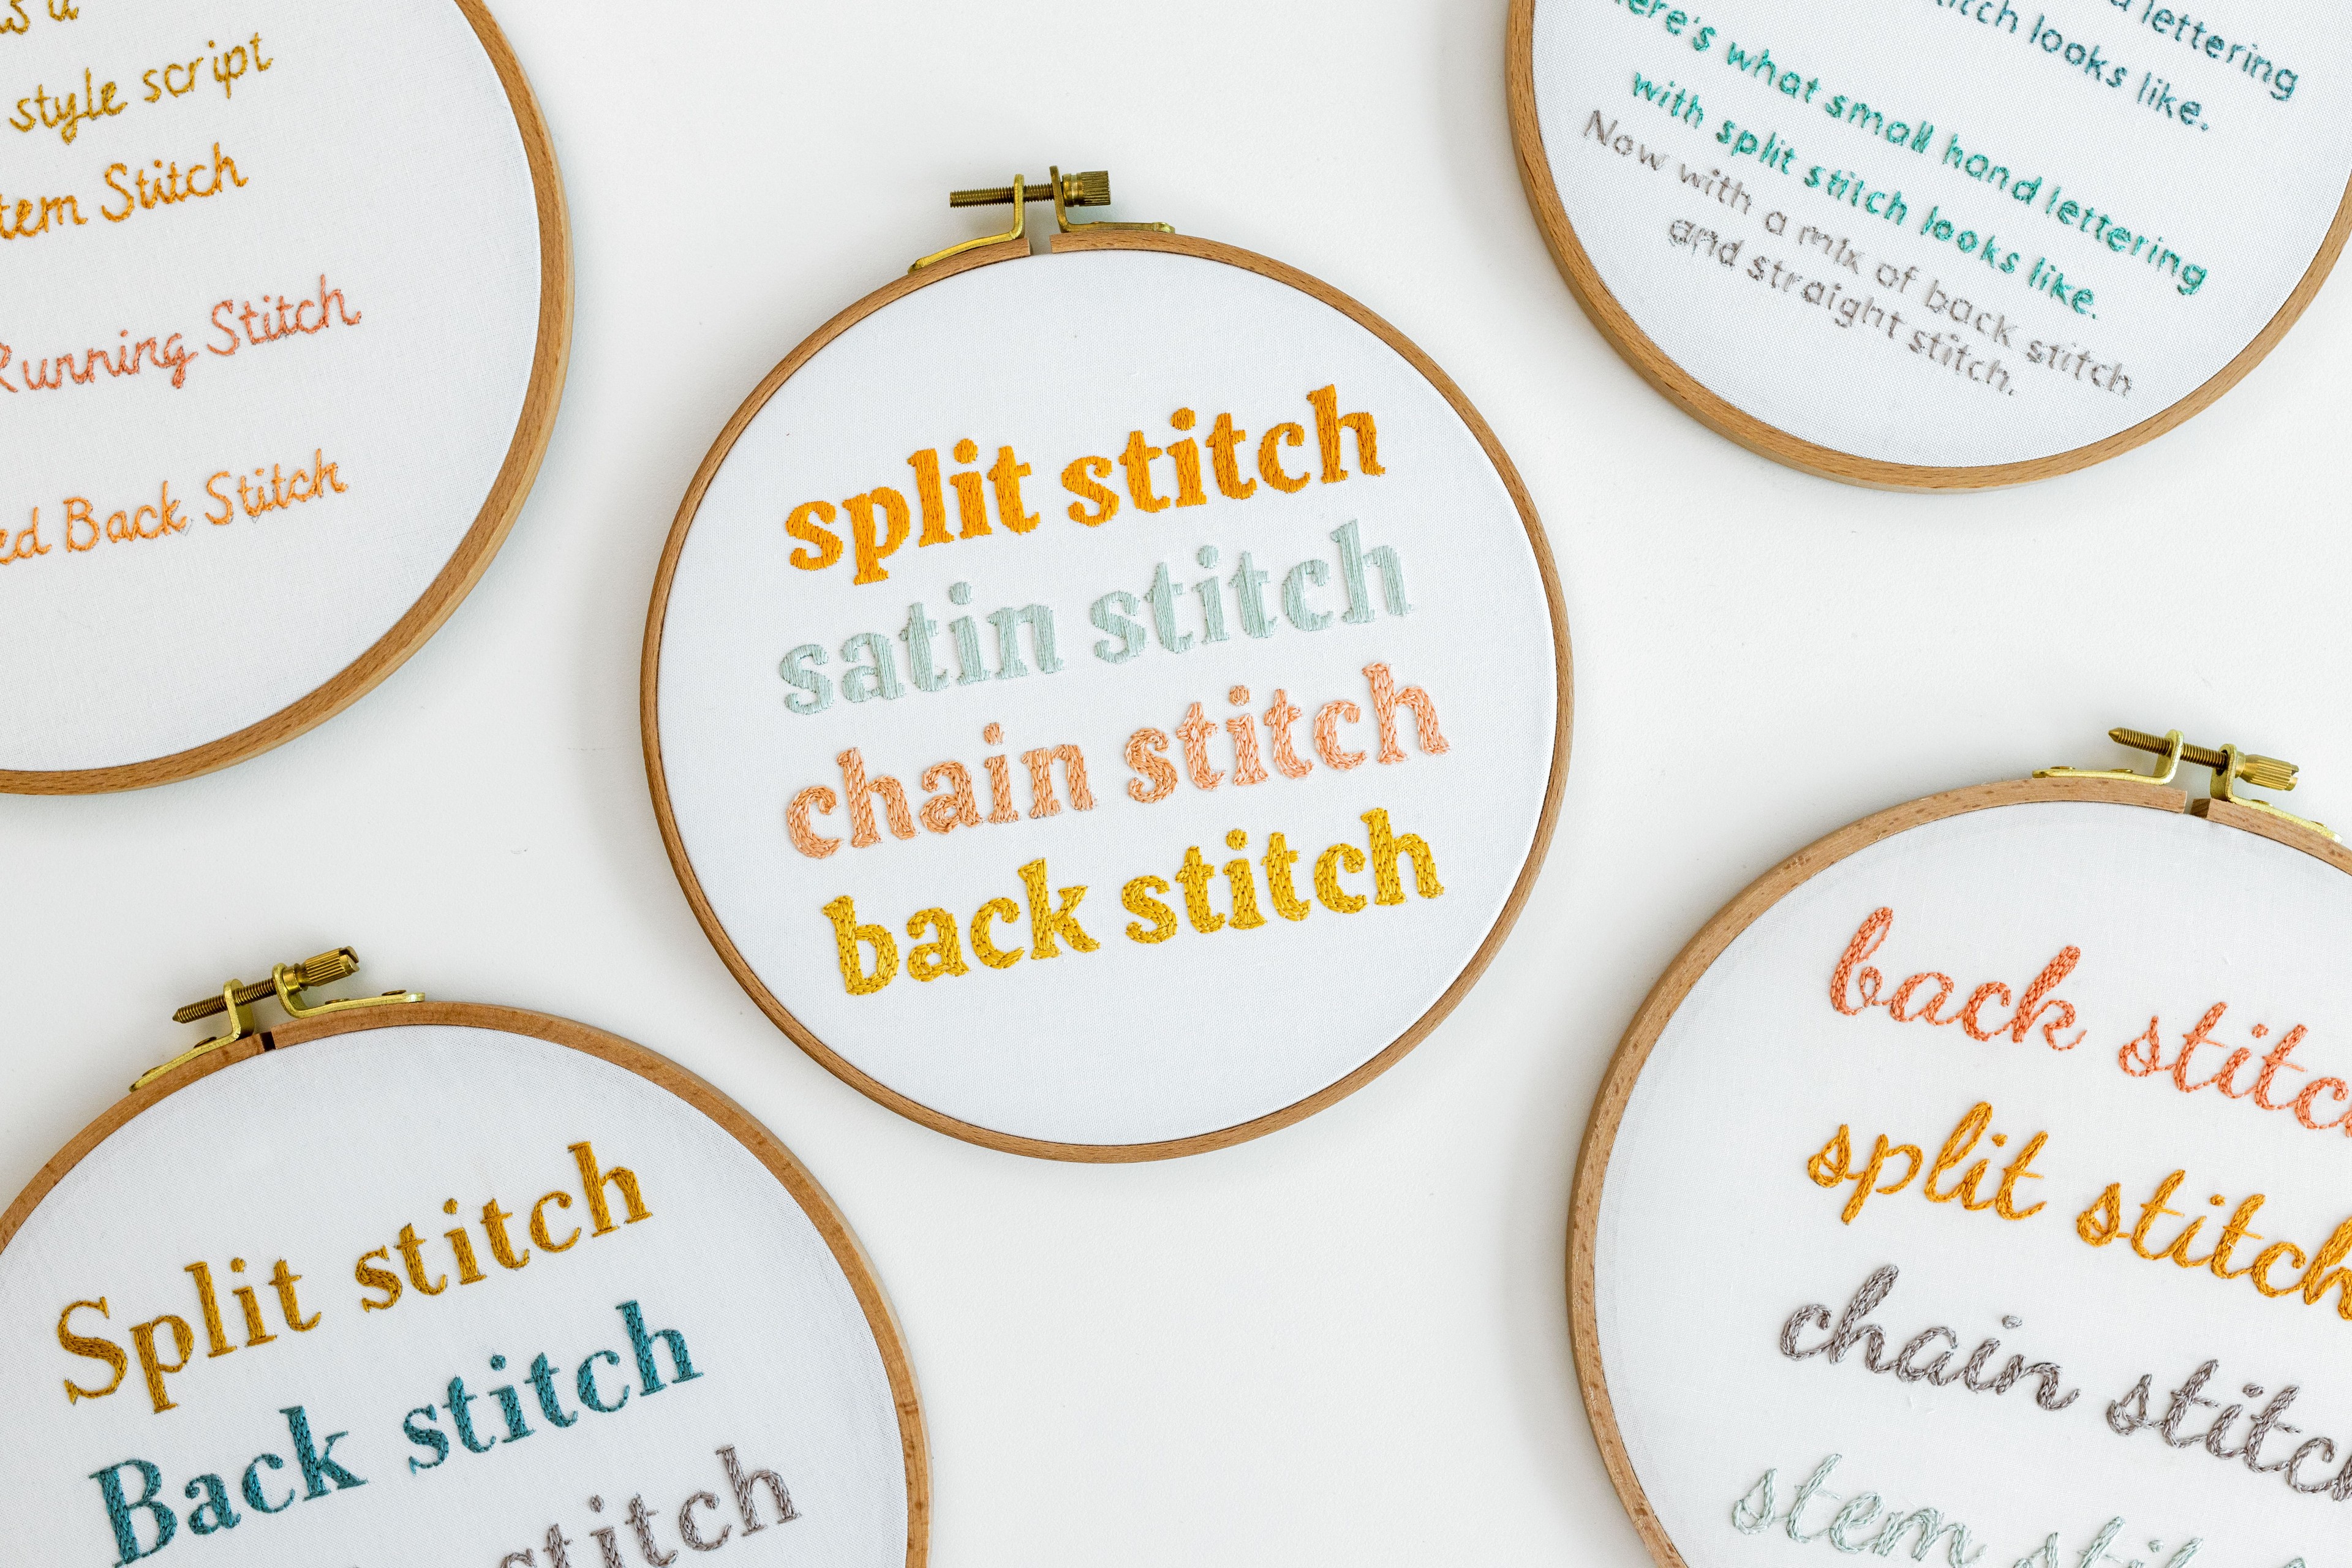 This is an image of different hoops with embroidered words on them.